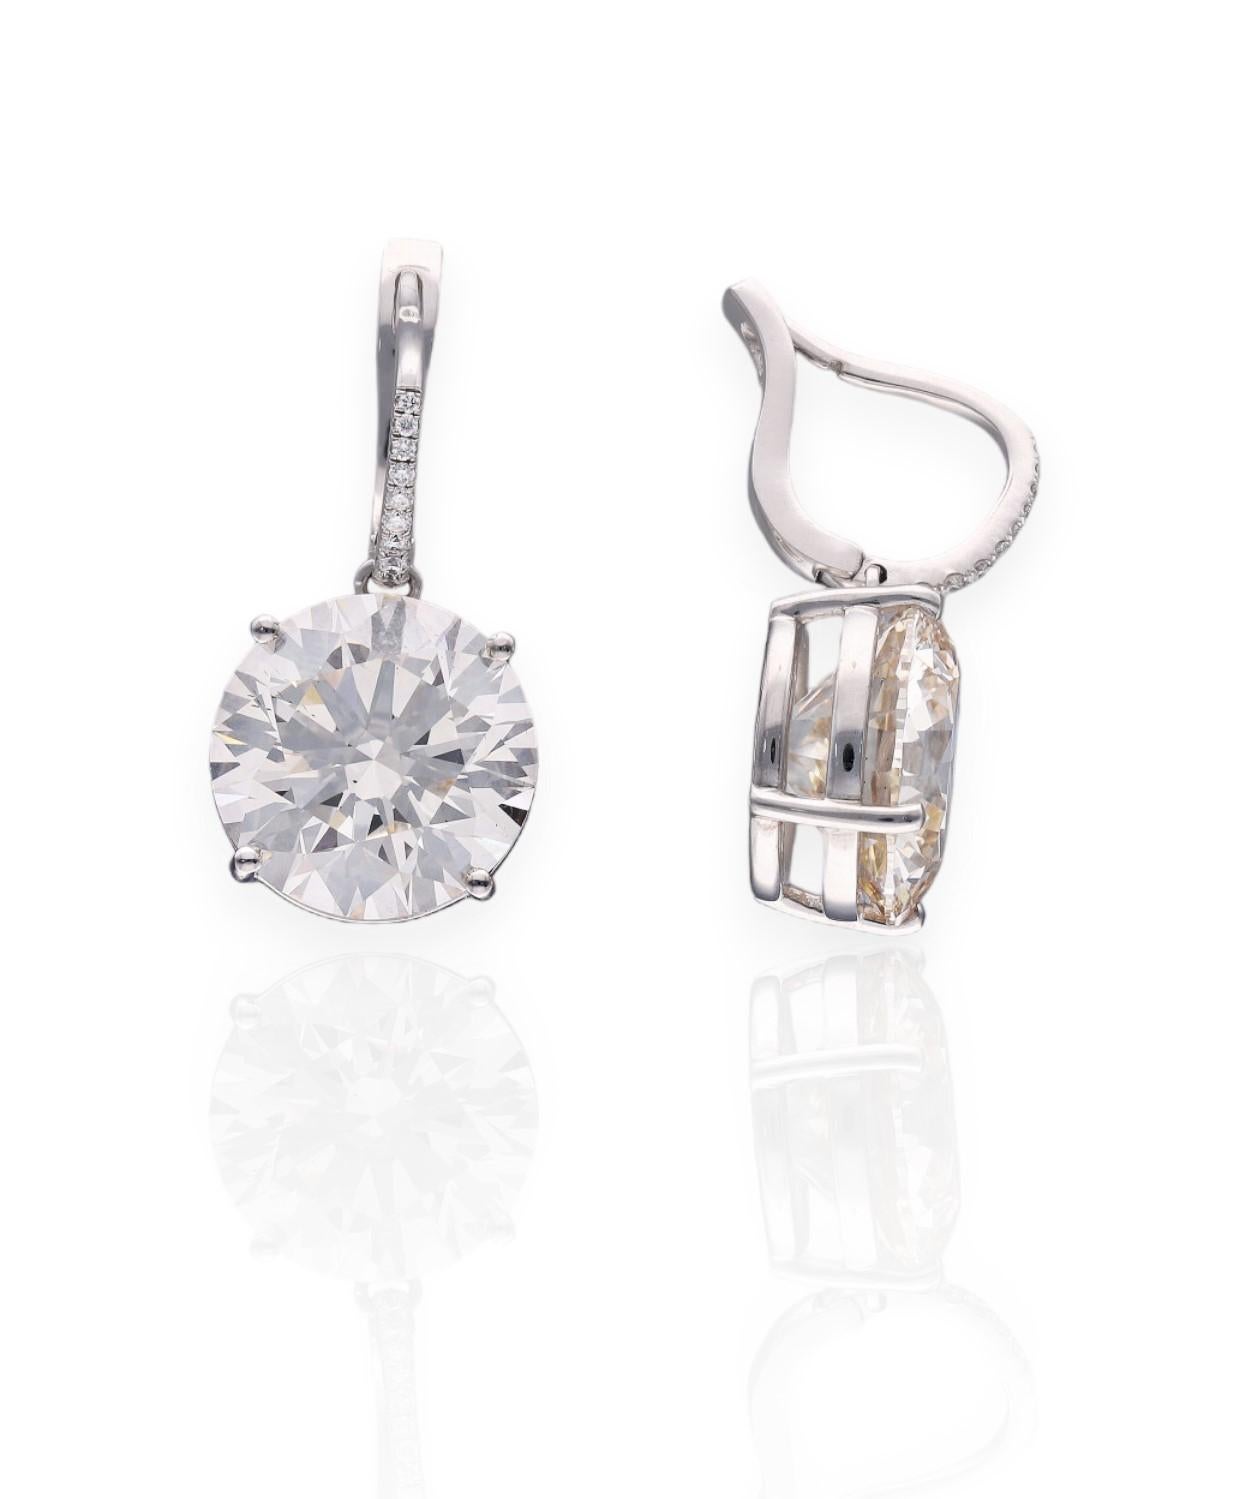 Stunning 20.21cts total drop earrings in 18ct white gold

Each stones details:
10.14cts K VS2 HRD Certified
10.07cts L SI1 HRD Certified

Please take a look at our other listings for similar pieces.

We can remake the earrings to your design.
